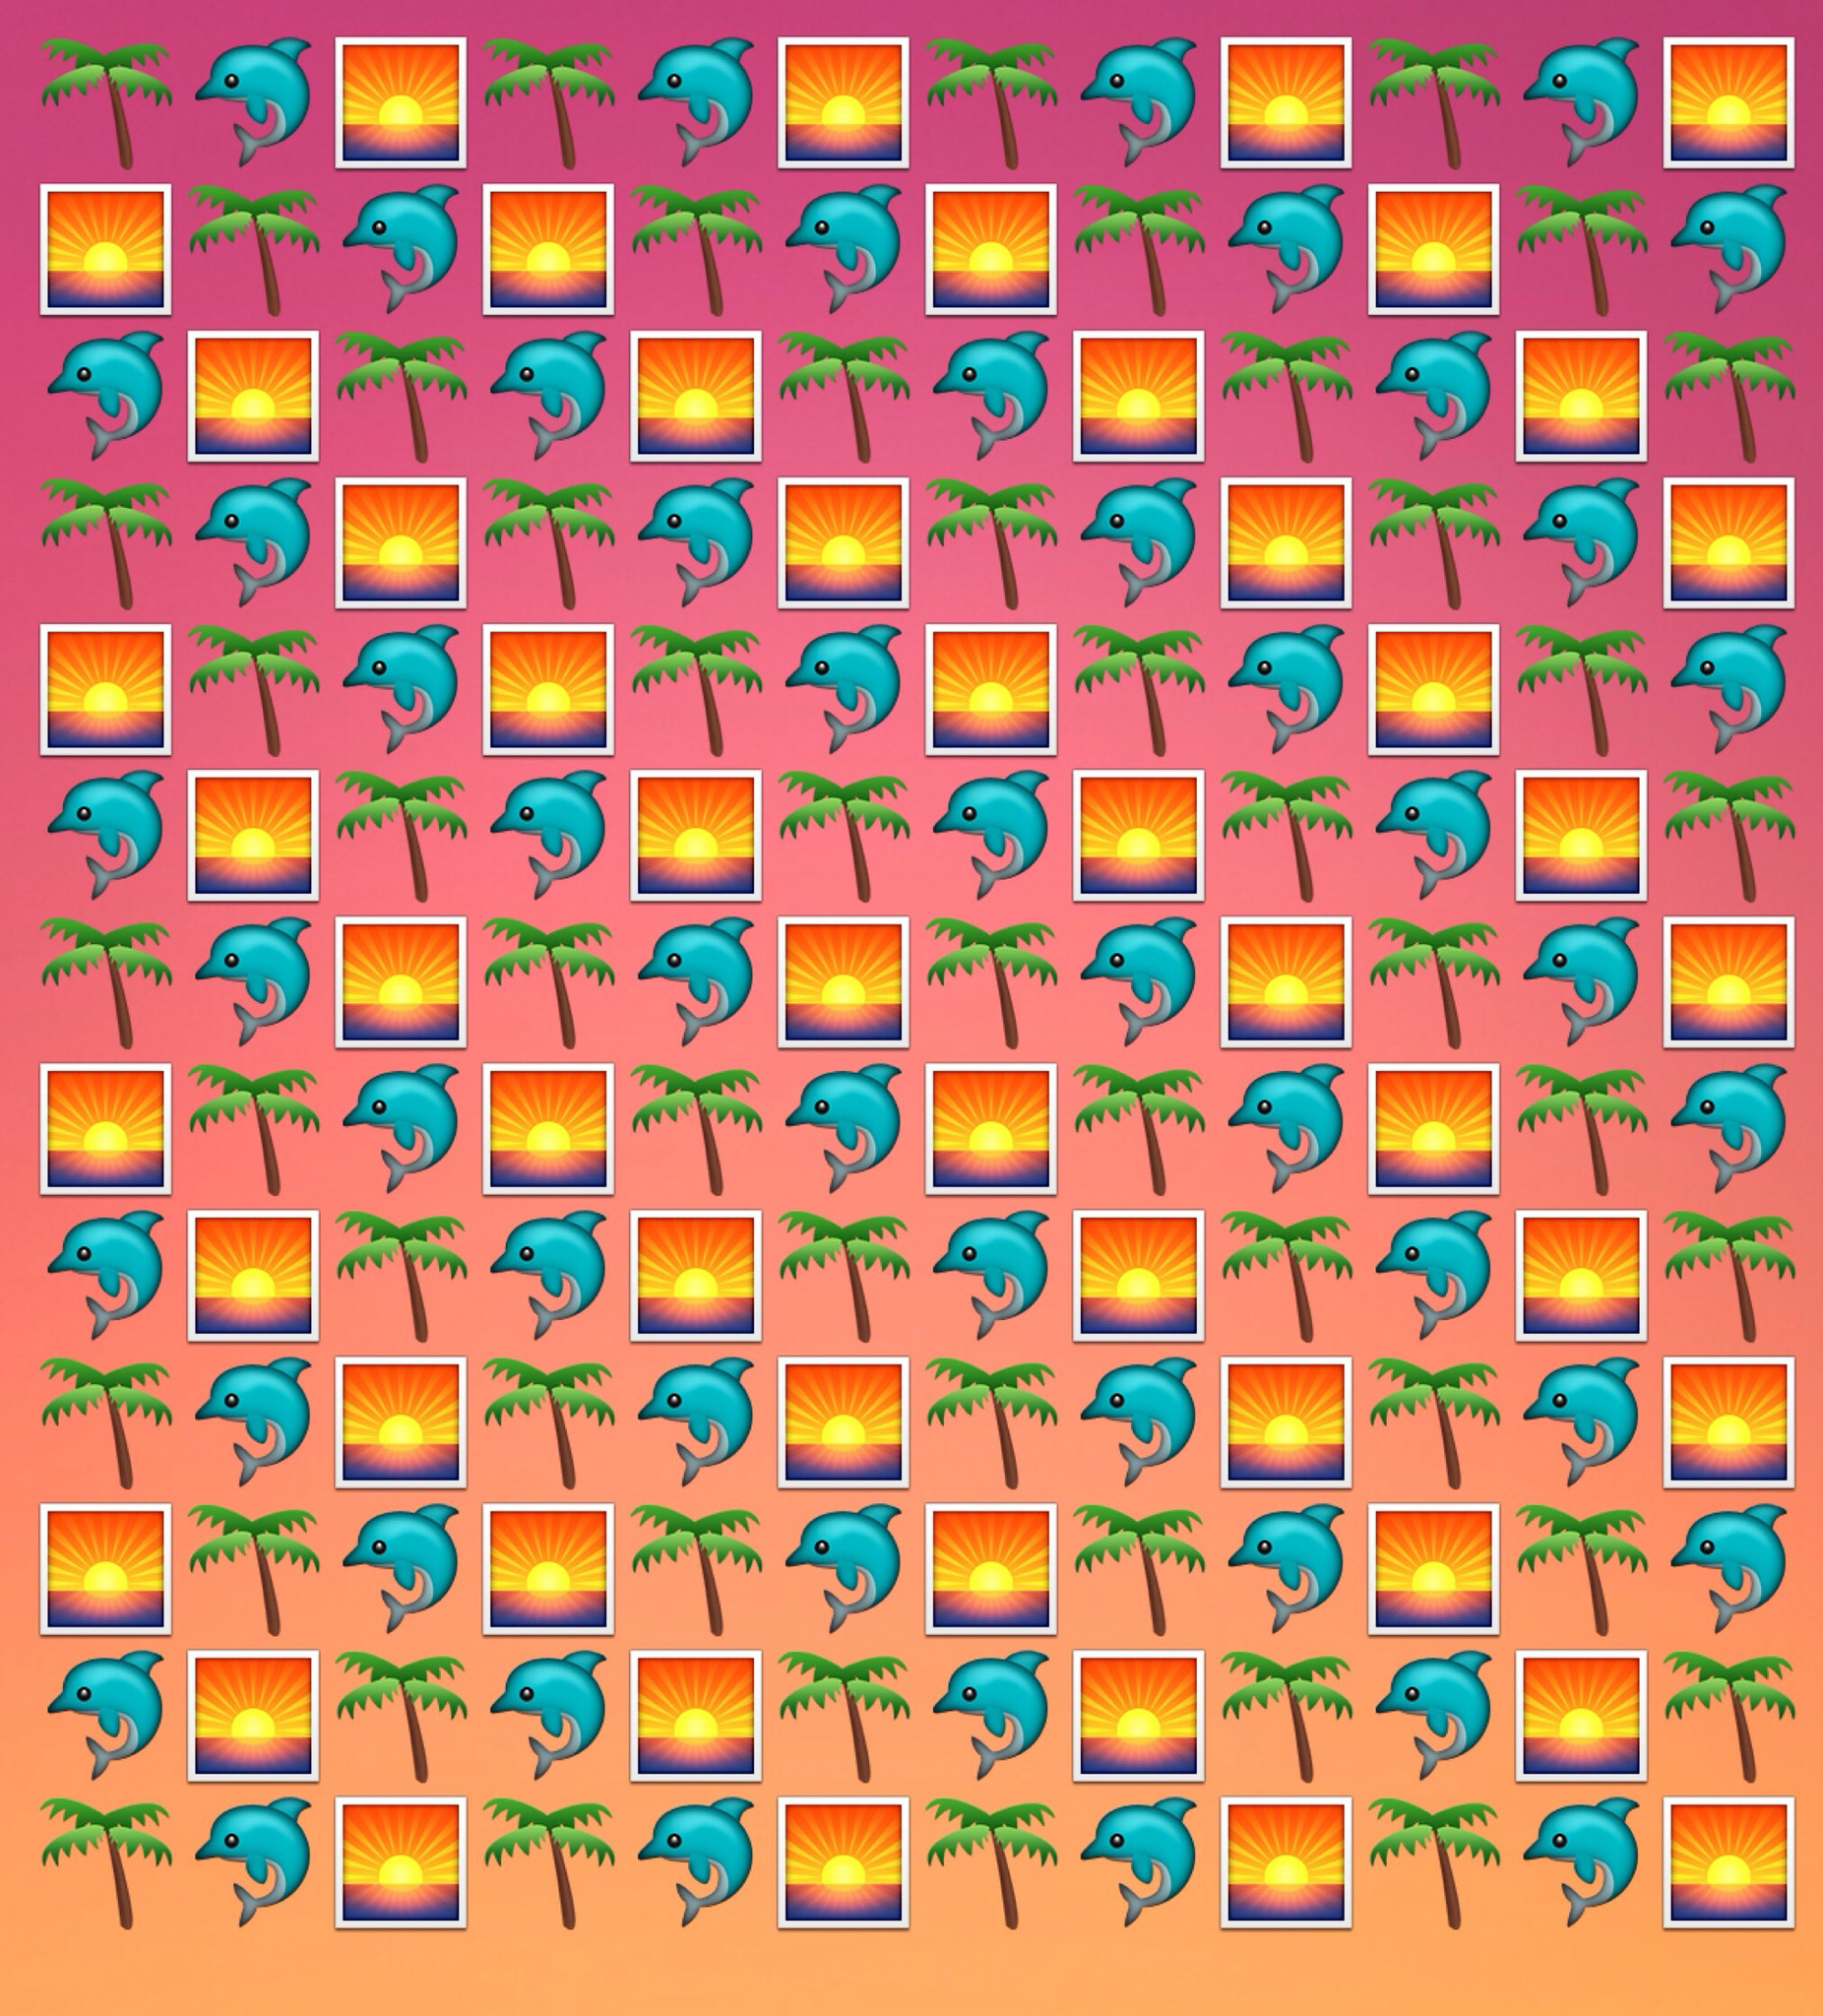 1852x2048 Emoji wallpaper background for desktop or phone ~ dolphins on a tropical  sunset beach